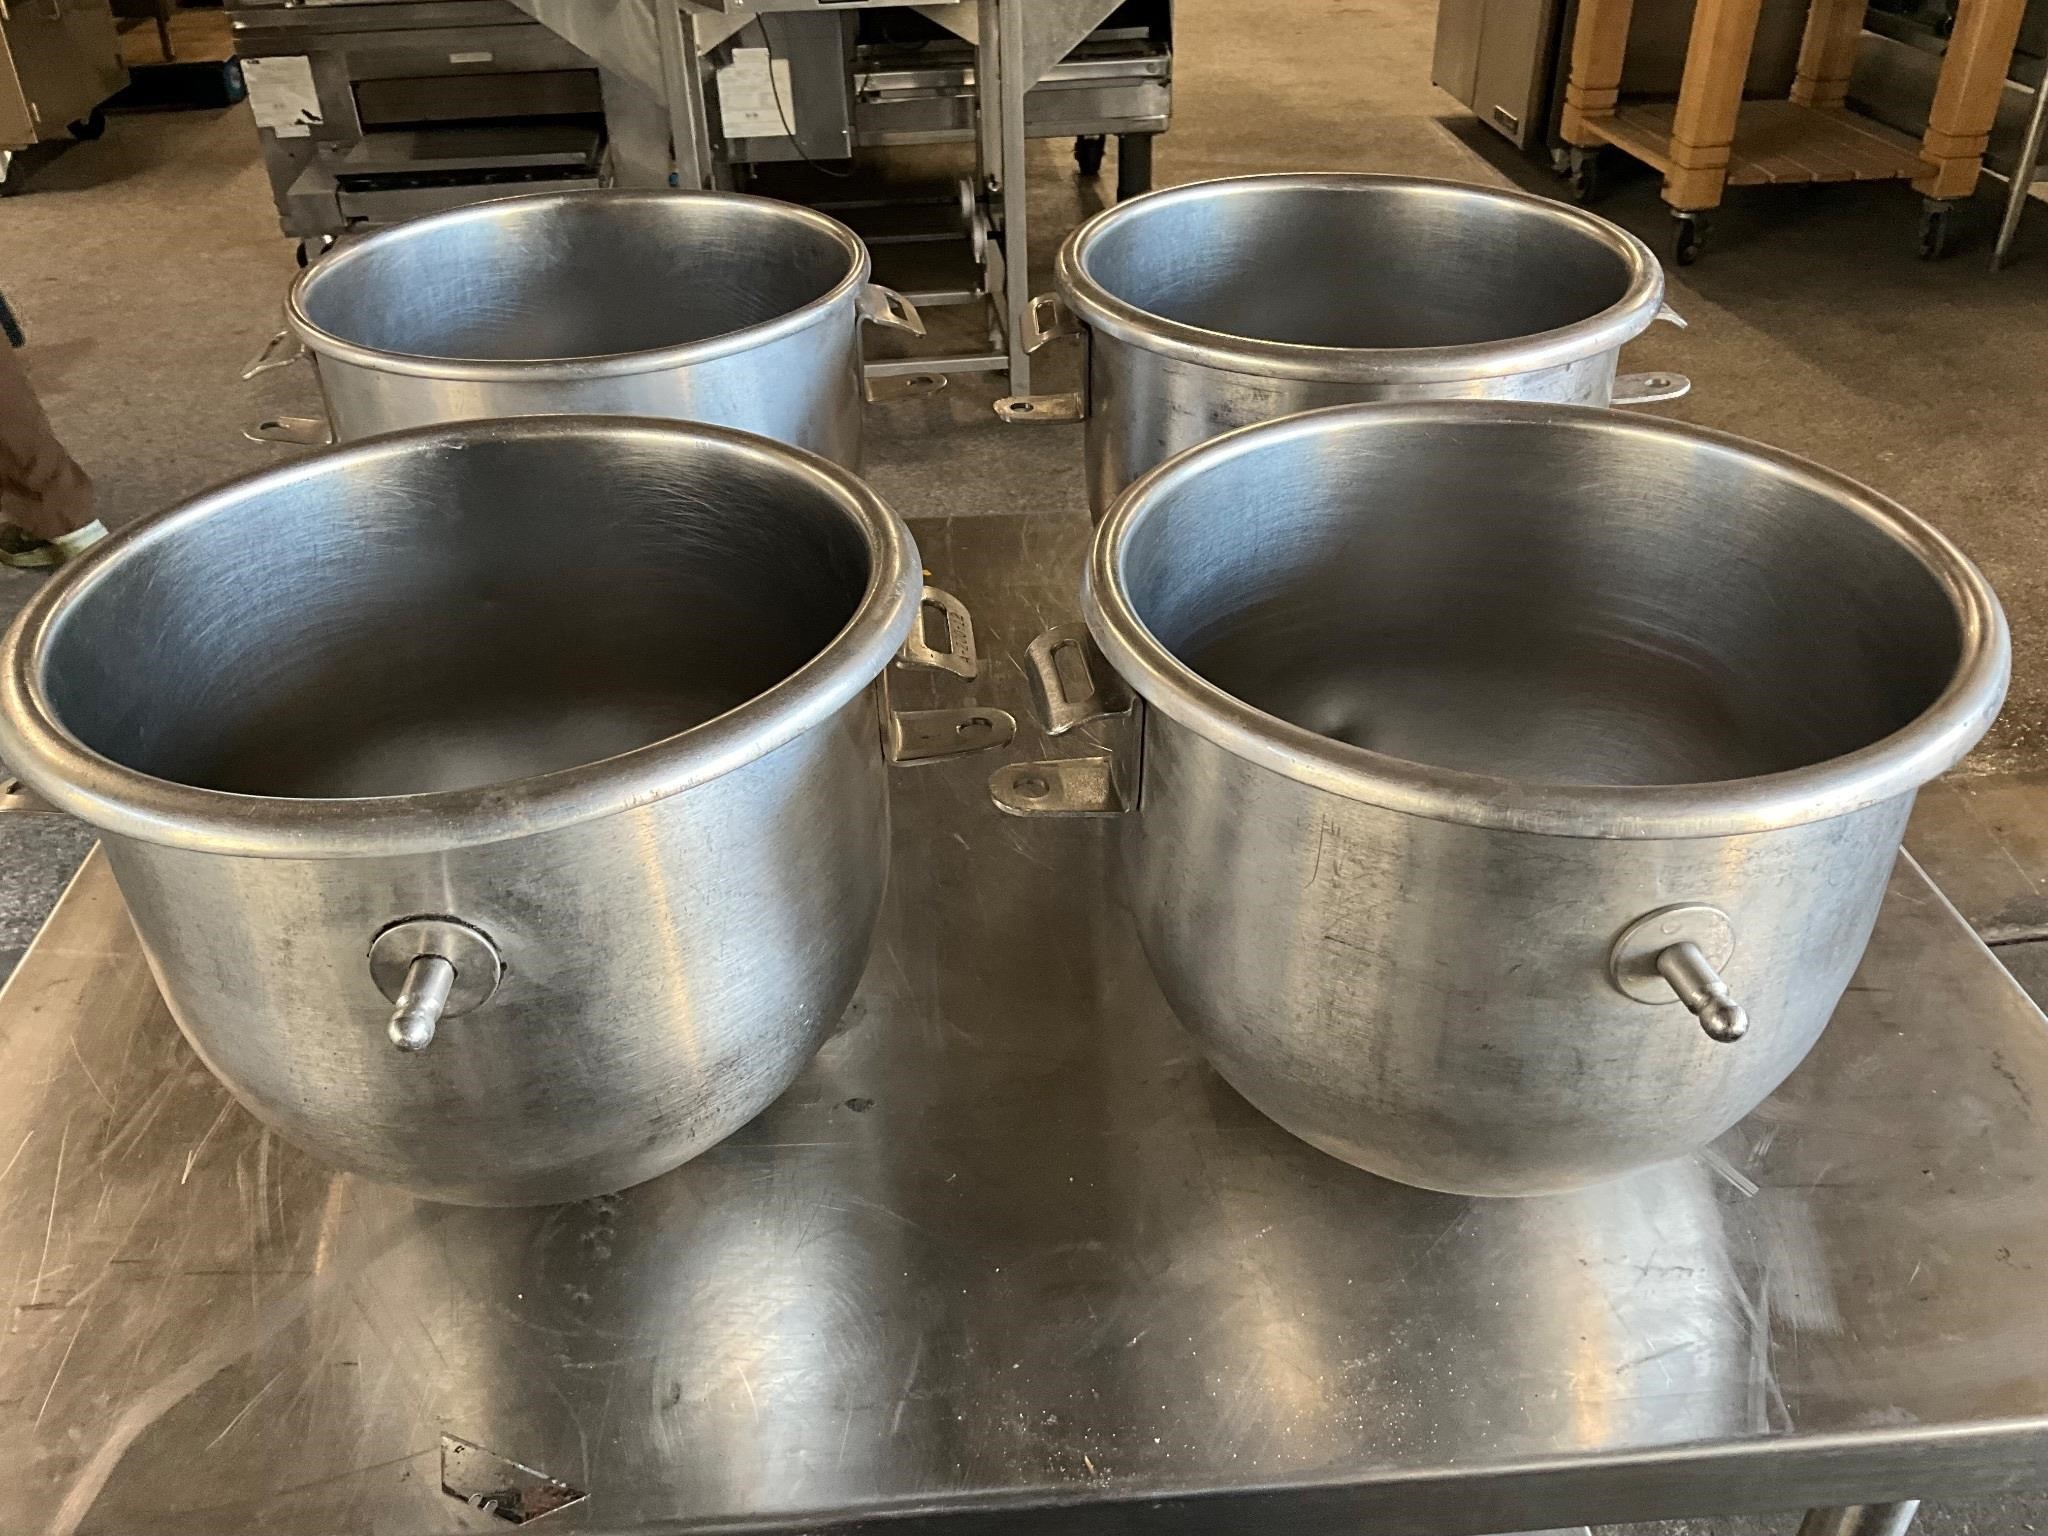 Stainless steel 12qt bowl for Hobart 20qt mixer